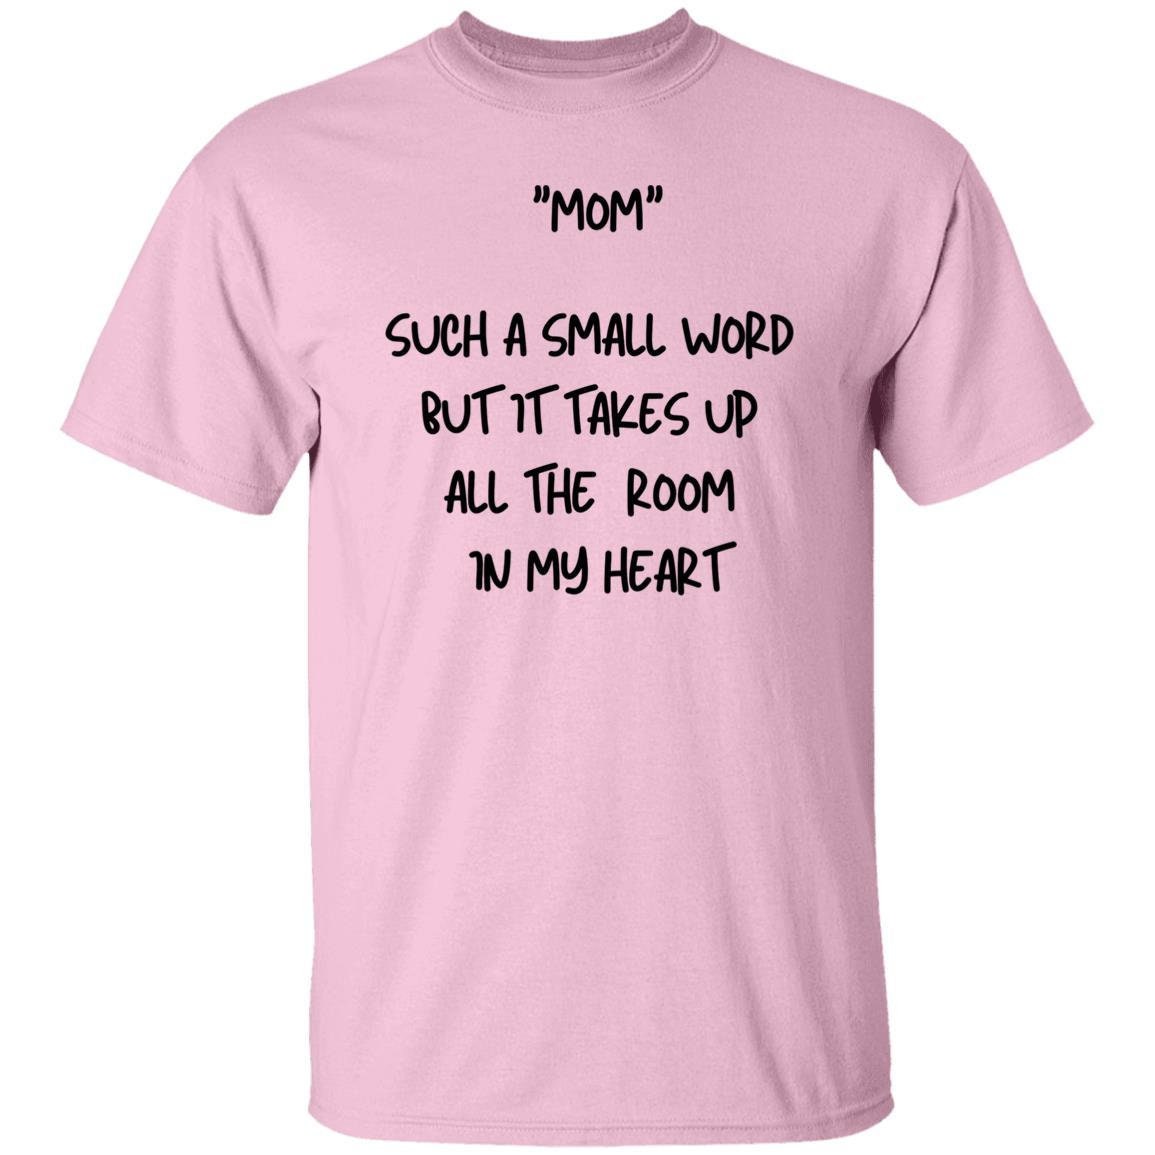 Sweet Tee Shirt for Mom - Mother's Day Shirt, Baby Shower Gift - Shirt for Pregnant Mom - Gift for Mom - Cotton Shirt Gift for Mother's Day